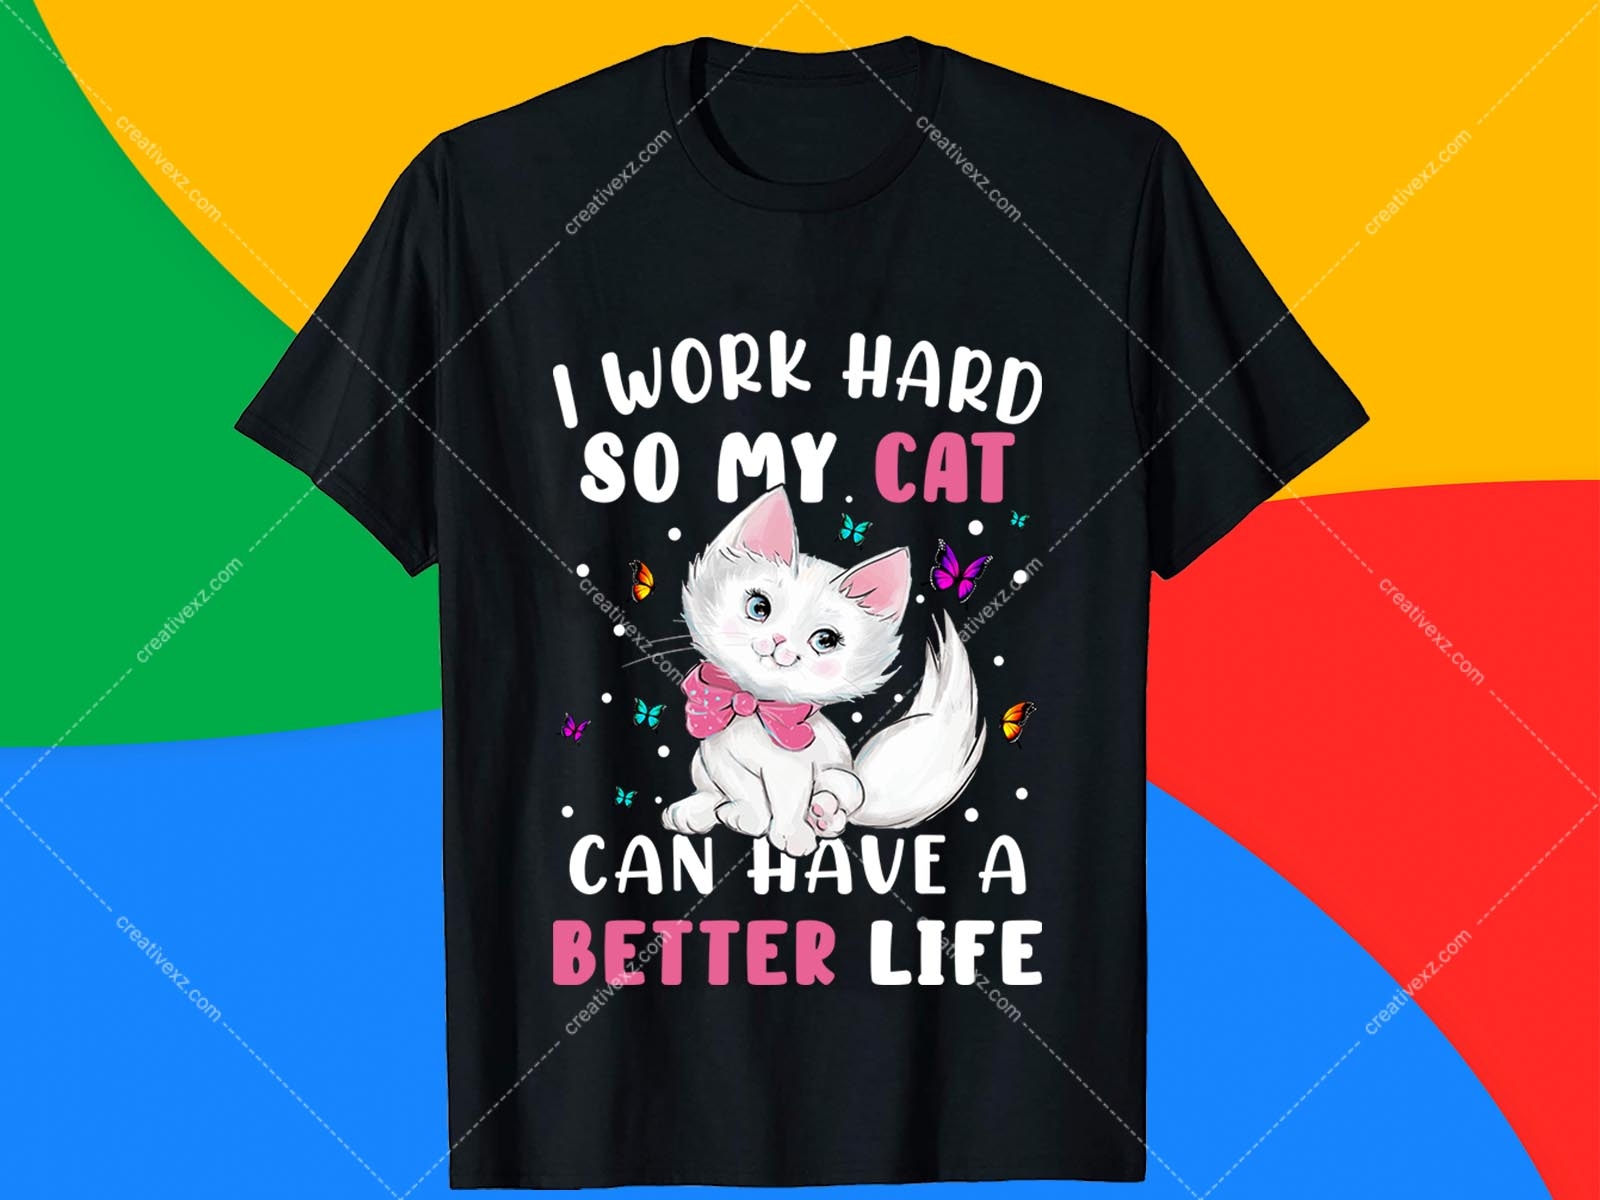 cat-t-shirt-design-free-download-by-alex-r-xtar-on-dribbble